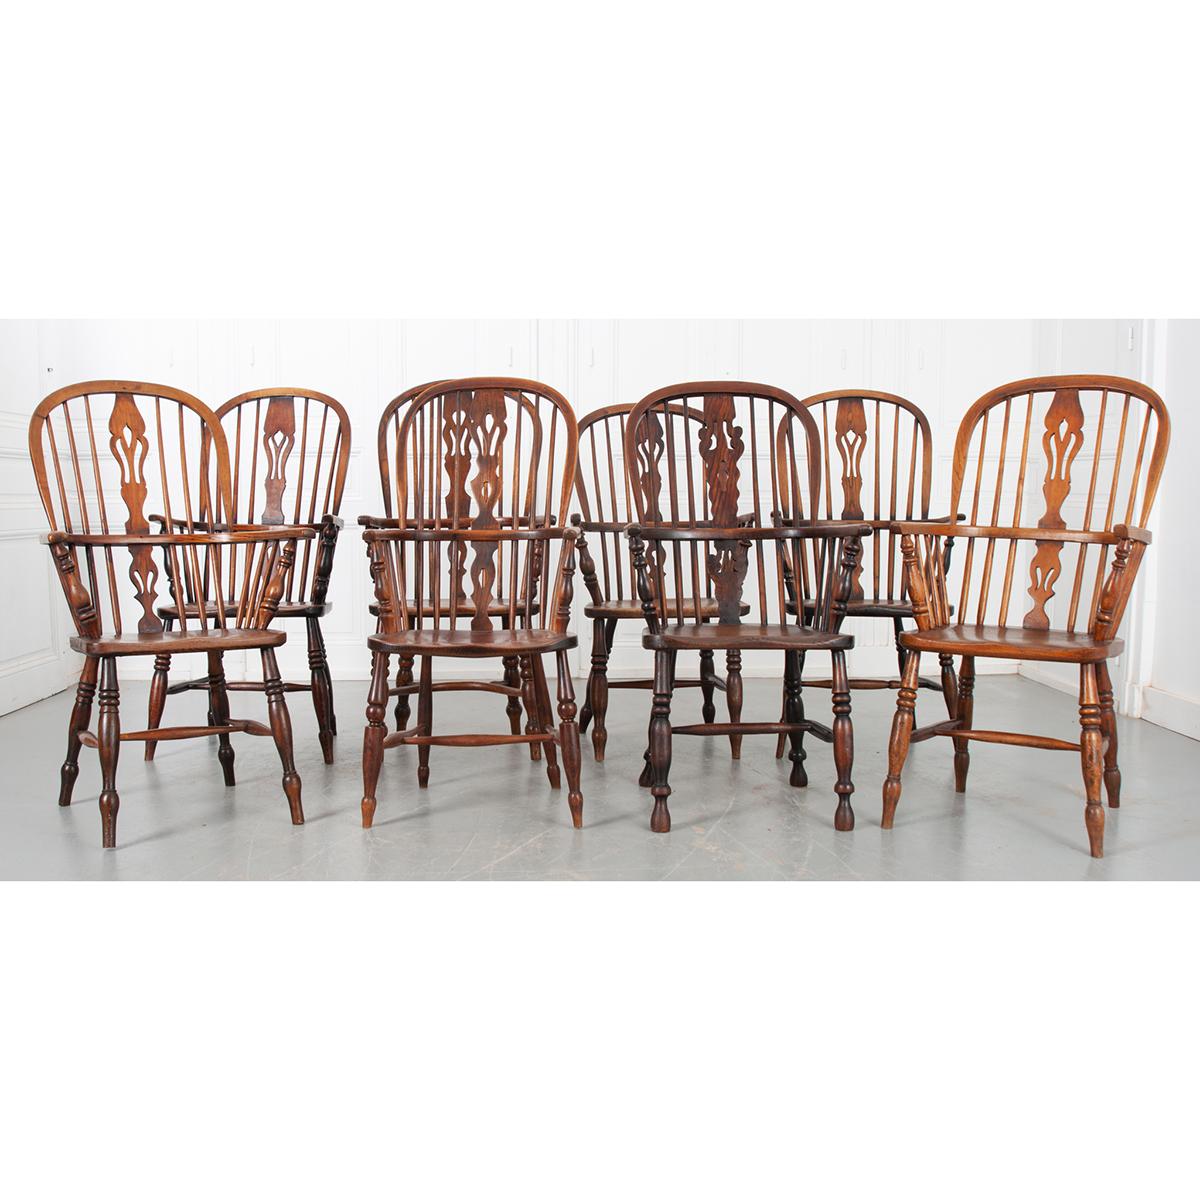 English 19th Century Set of 8 Oak Windsor Chairs For Sale 5